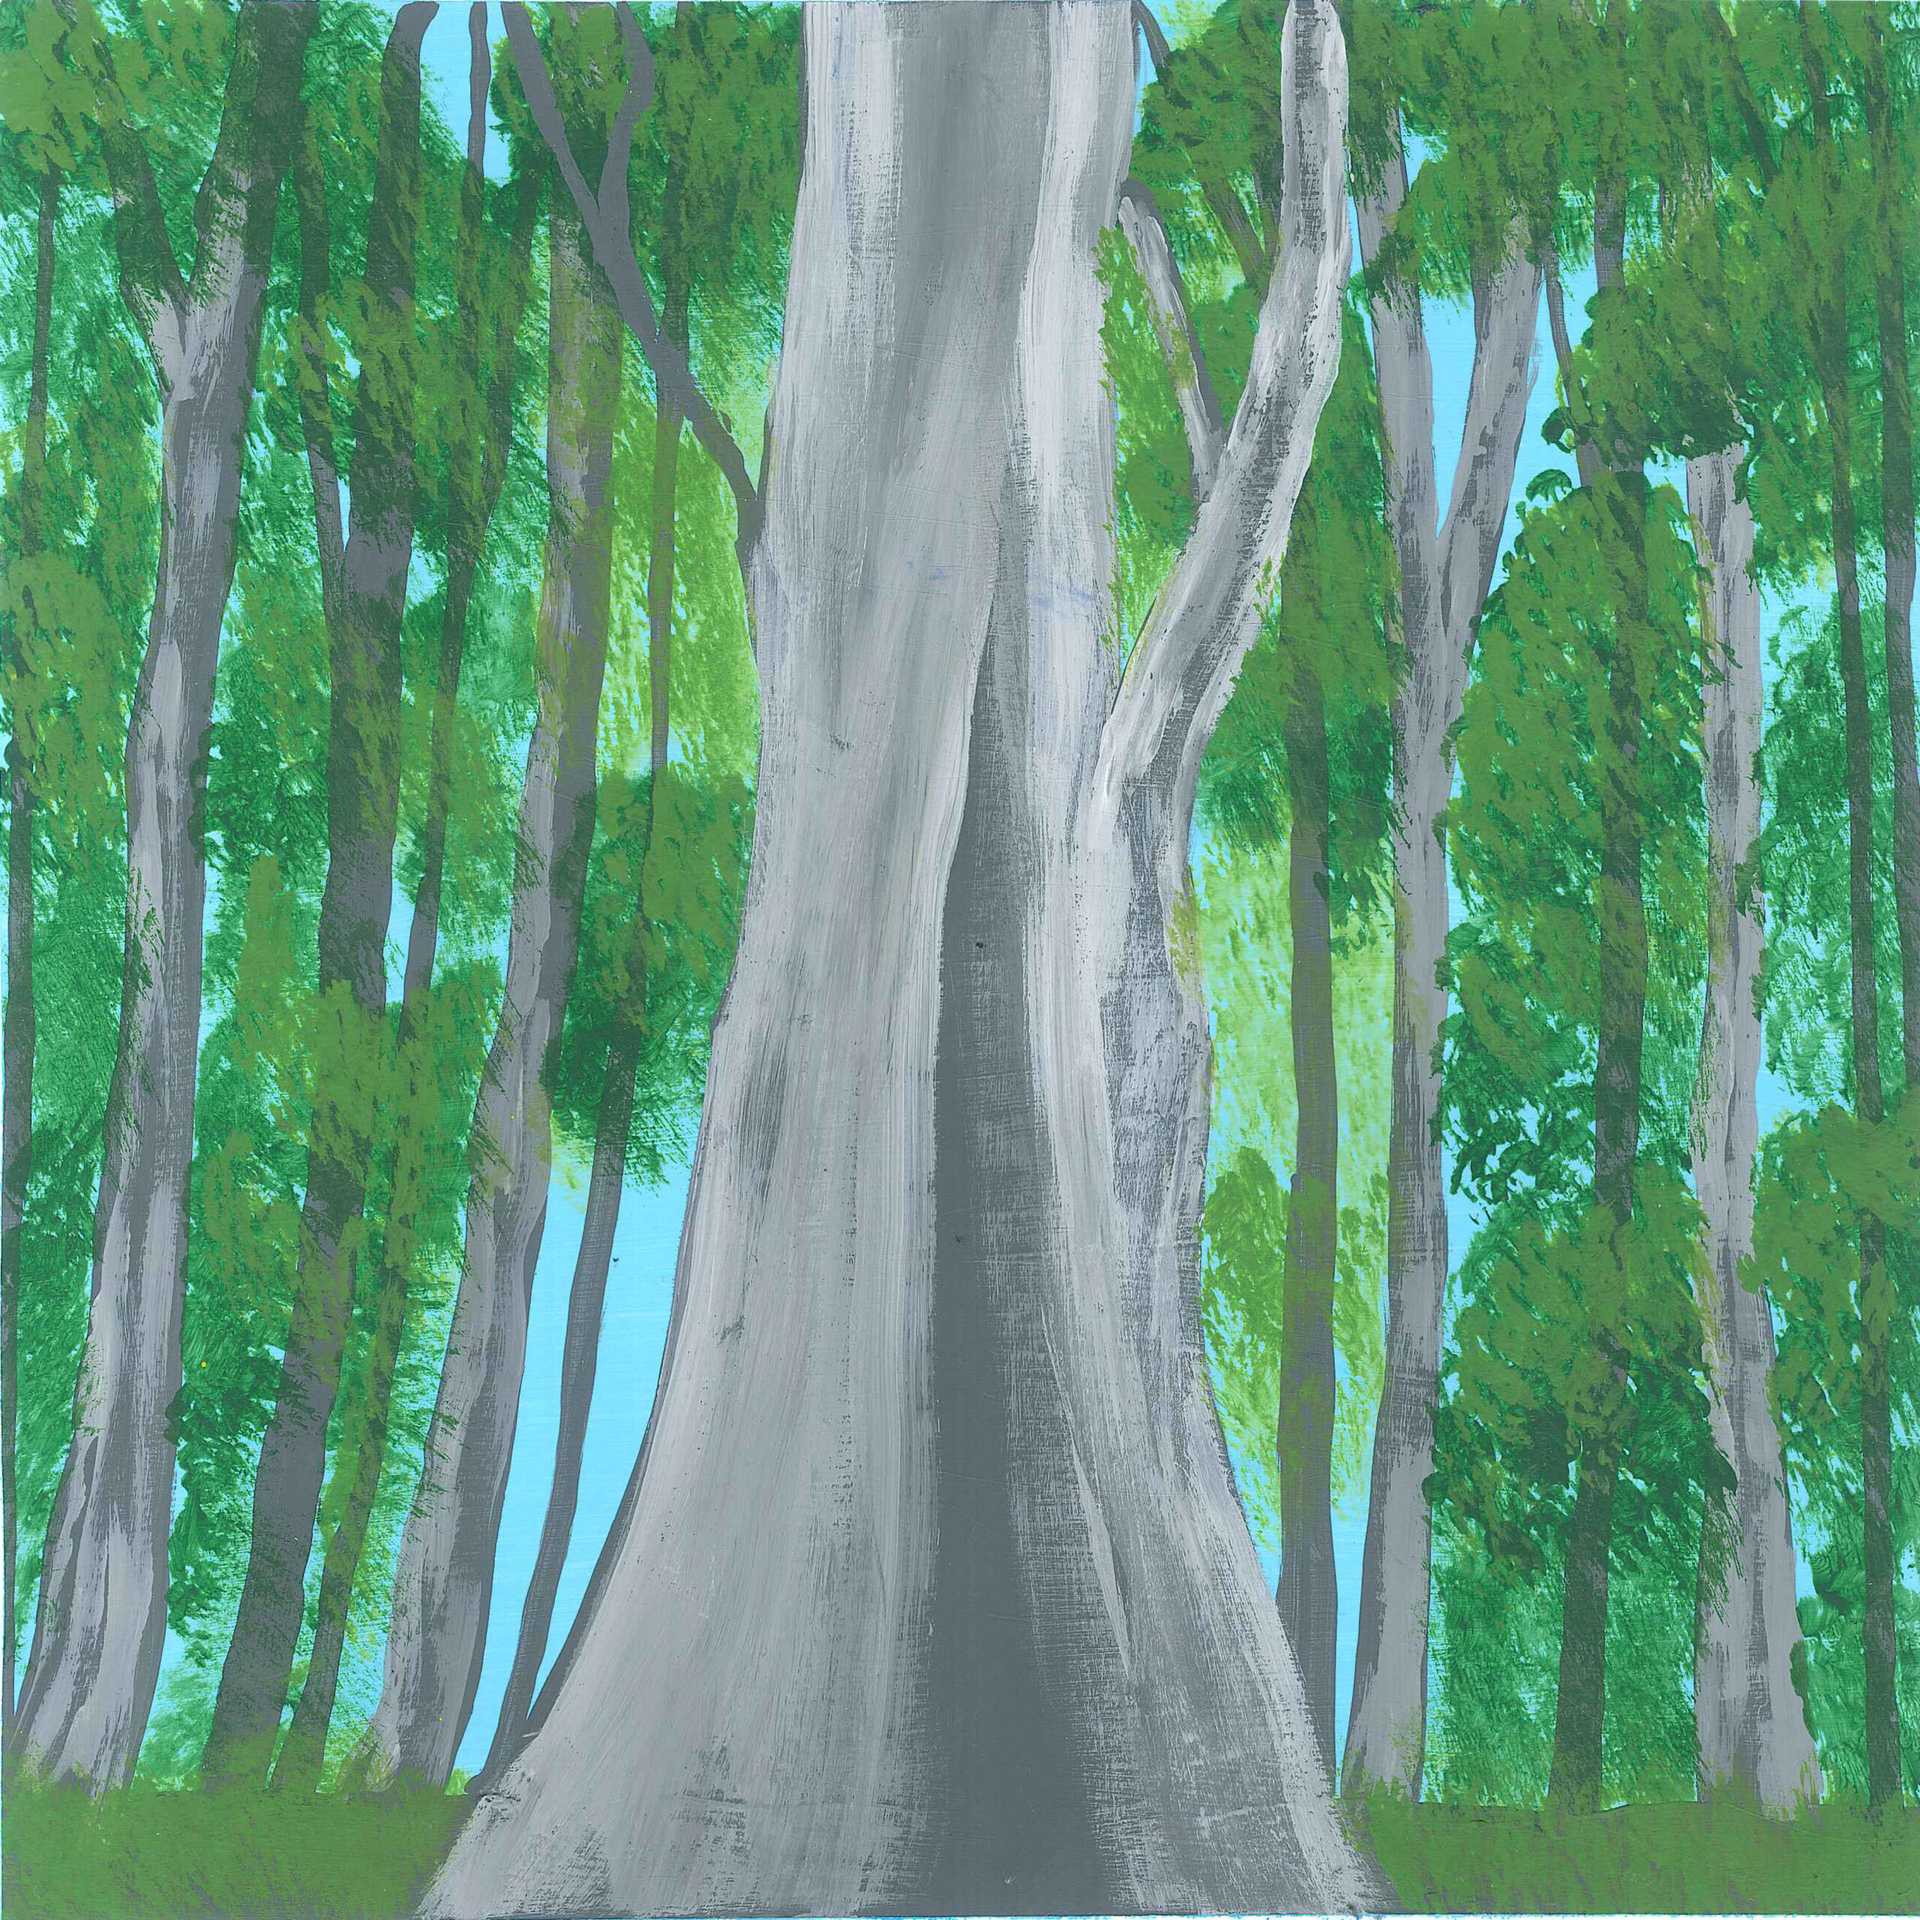 Australia – Tall Eucalypt Forest - nature landscape painting - earth.fm